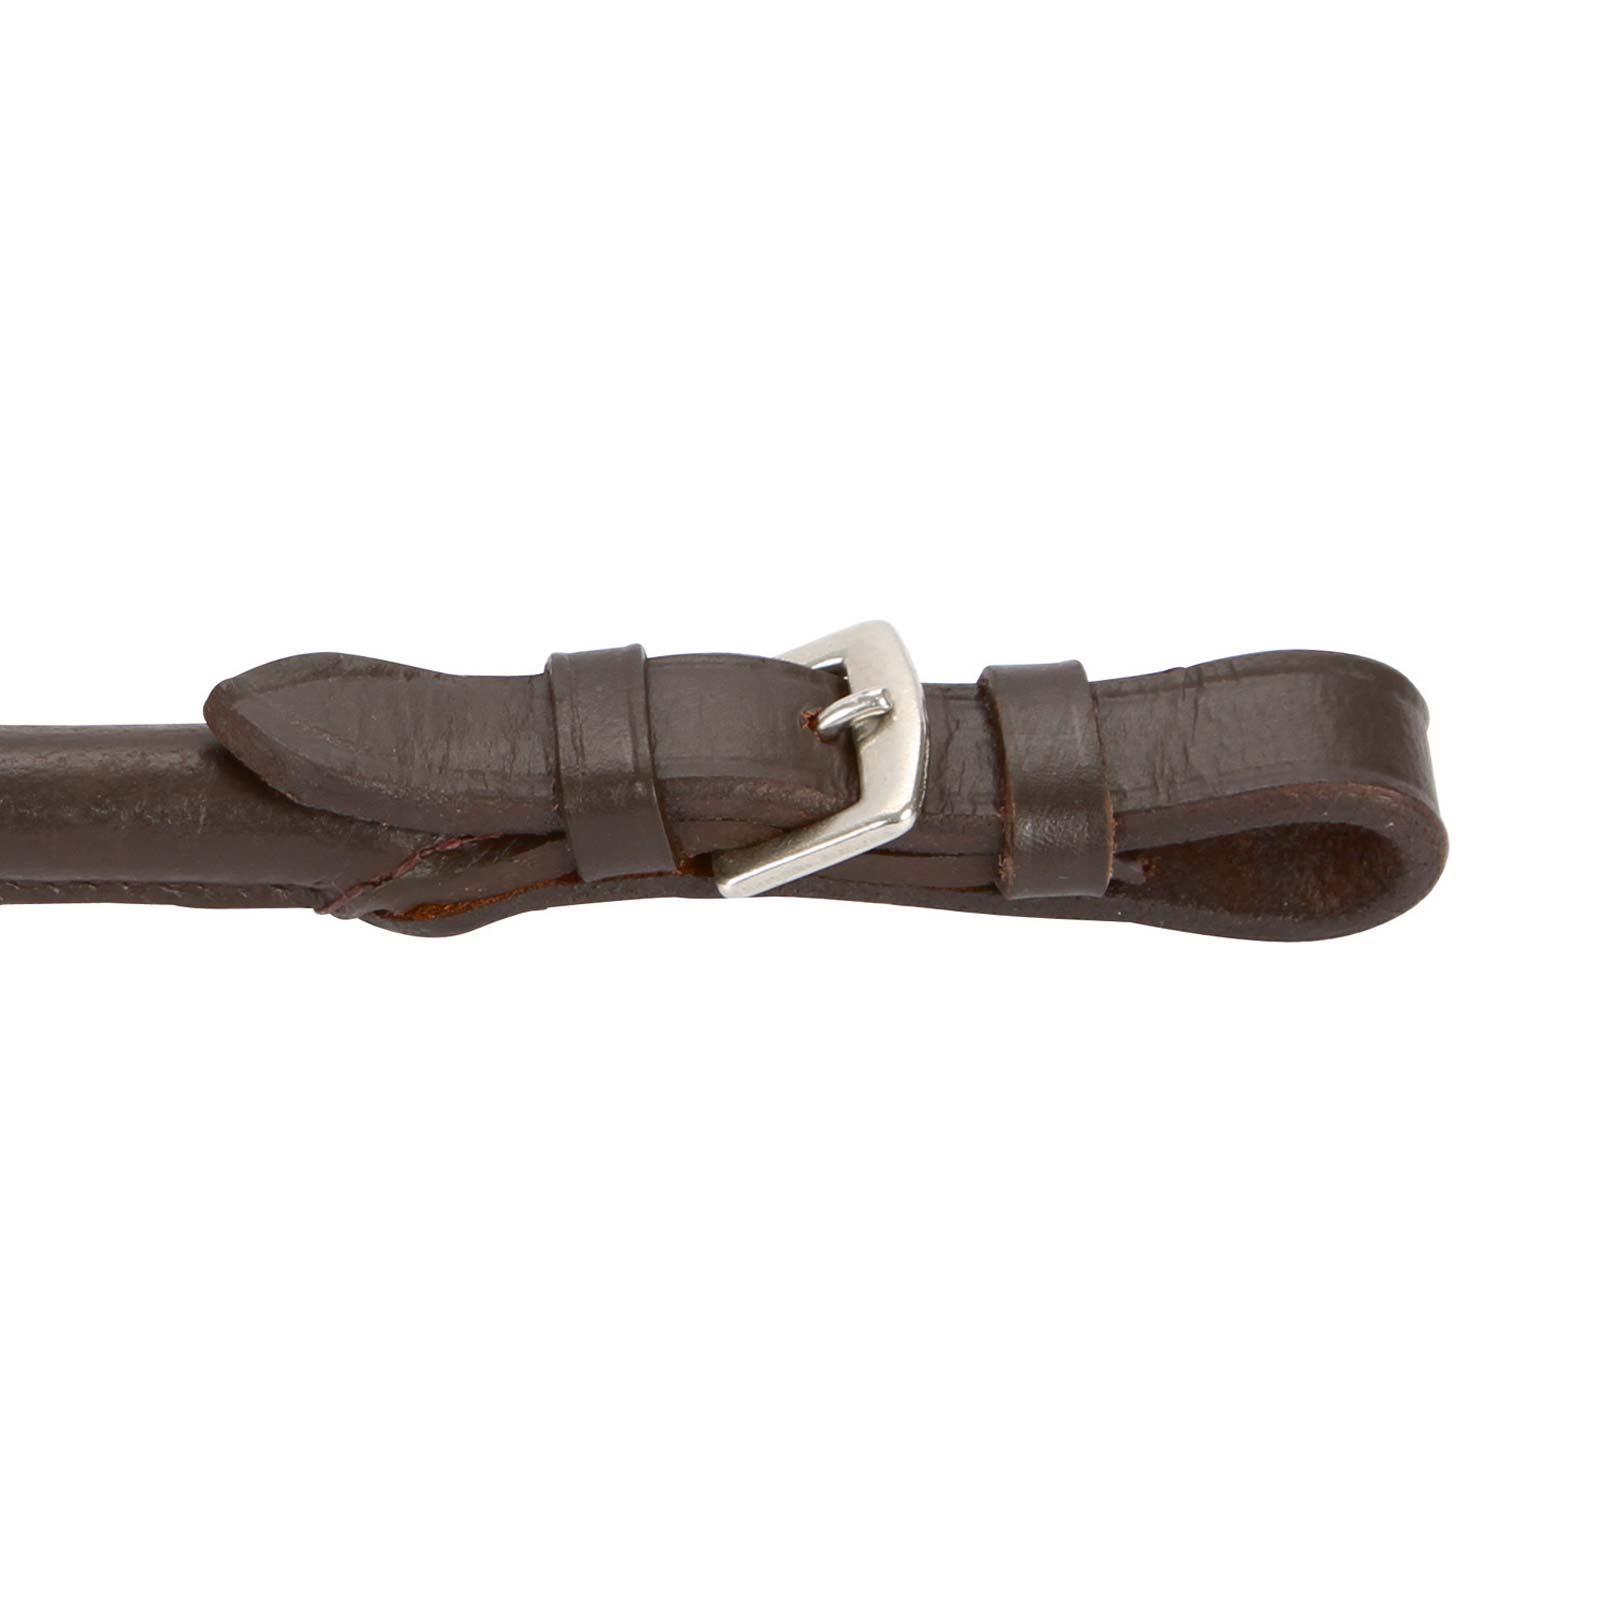 Holding leather strap, roundly stiched, 30 cm